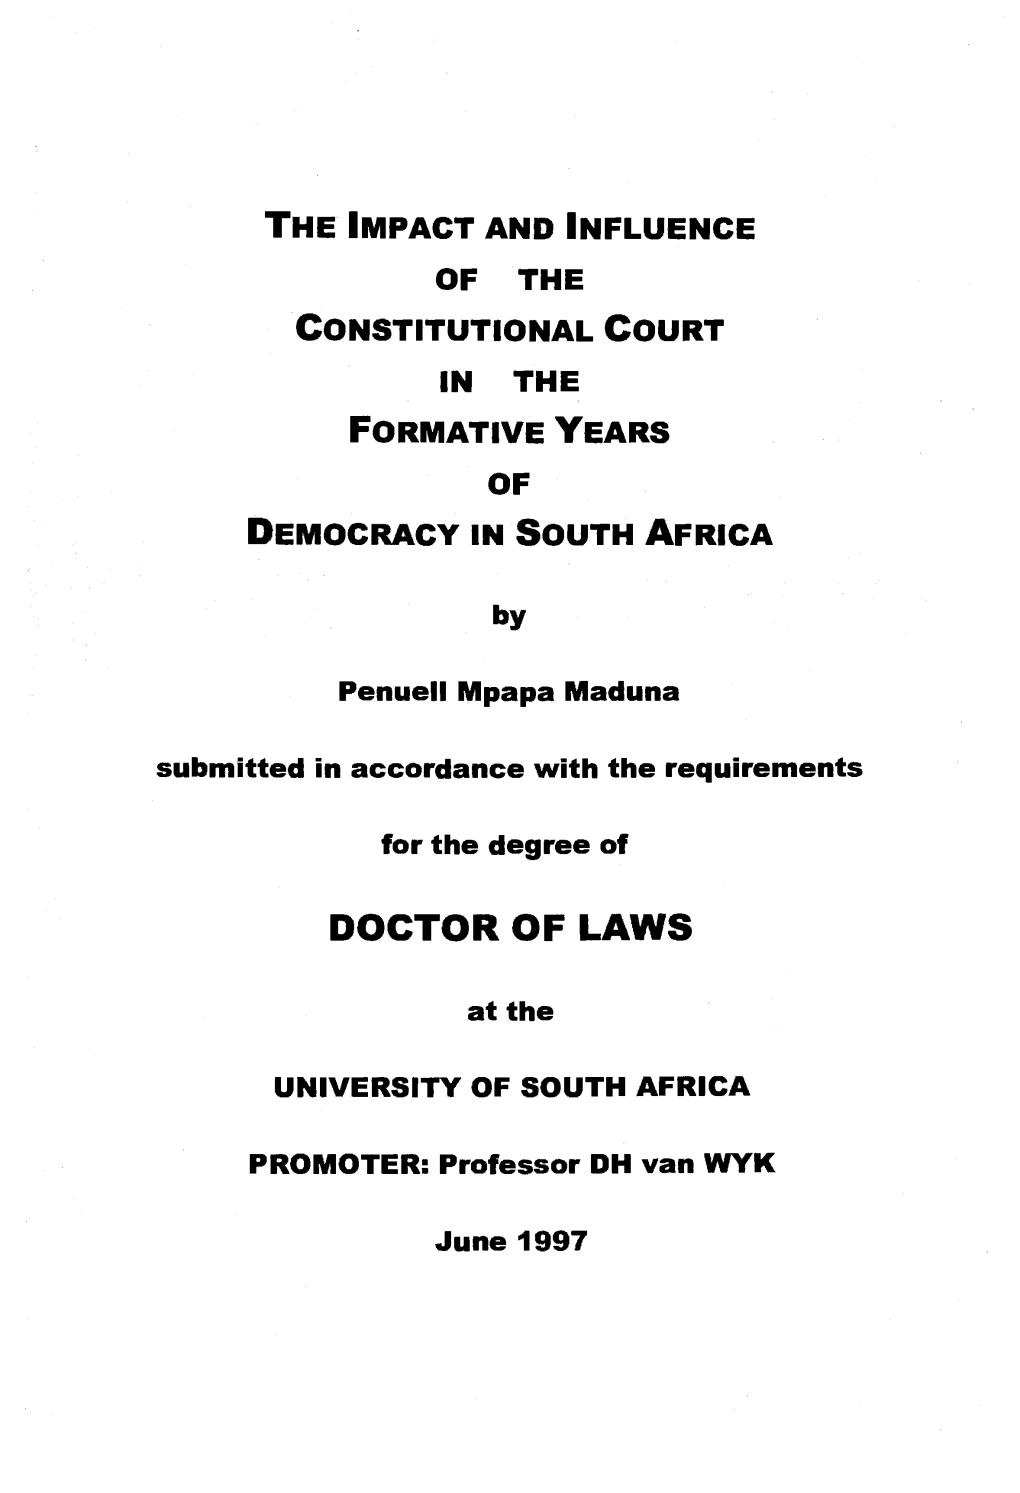 The Constitutional Court in the Formative Years of Democracy in South Africa